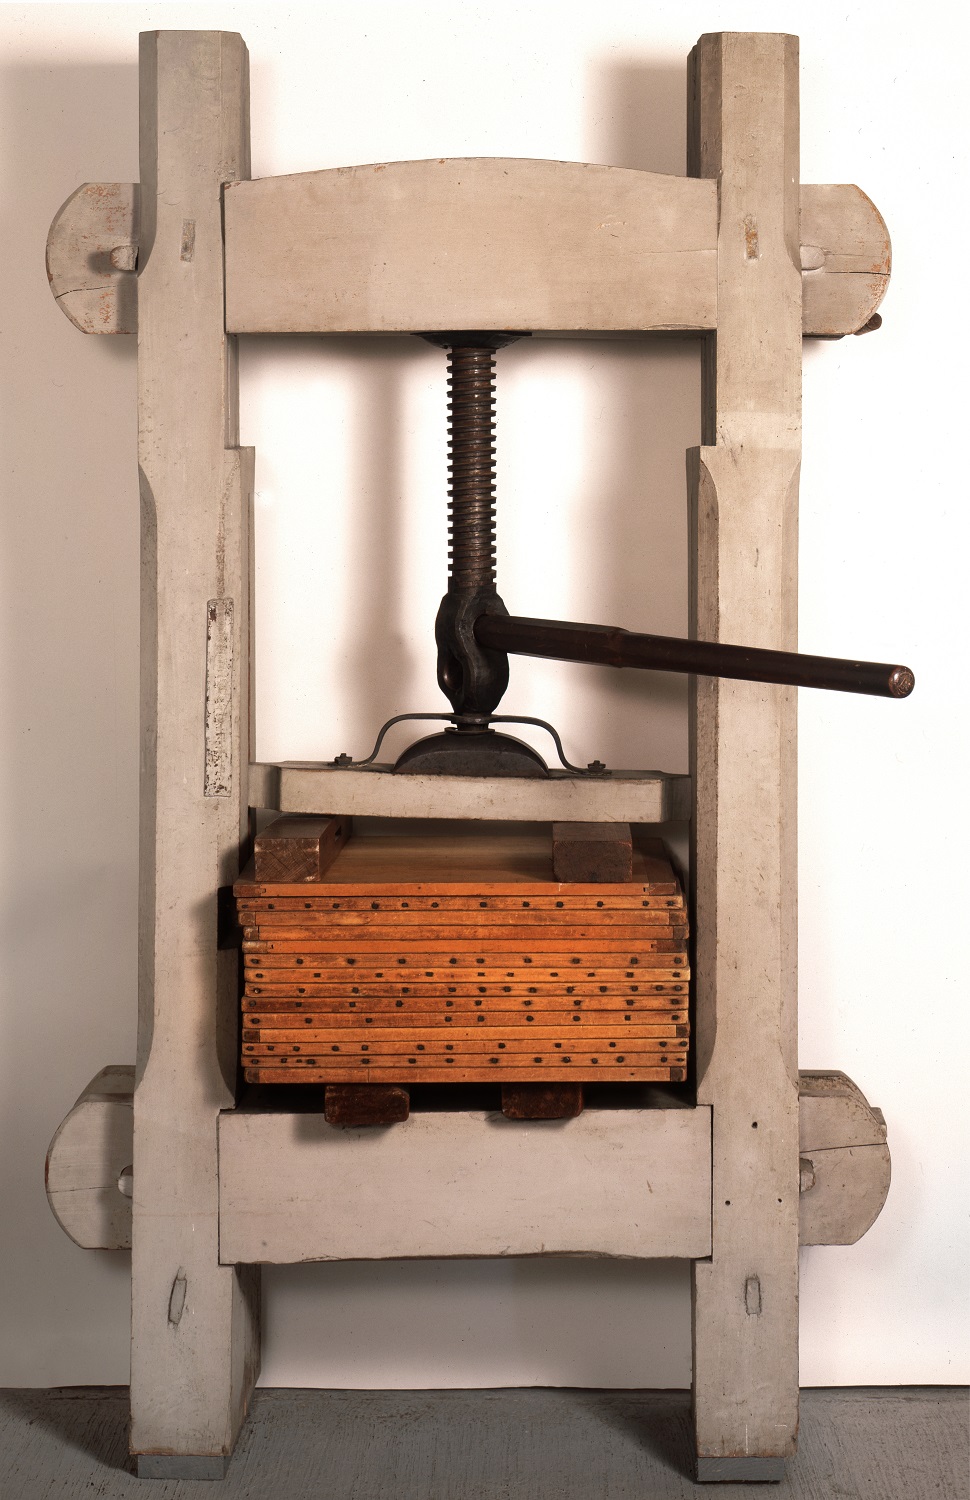 A wooden press with a wooden box on it.